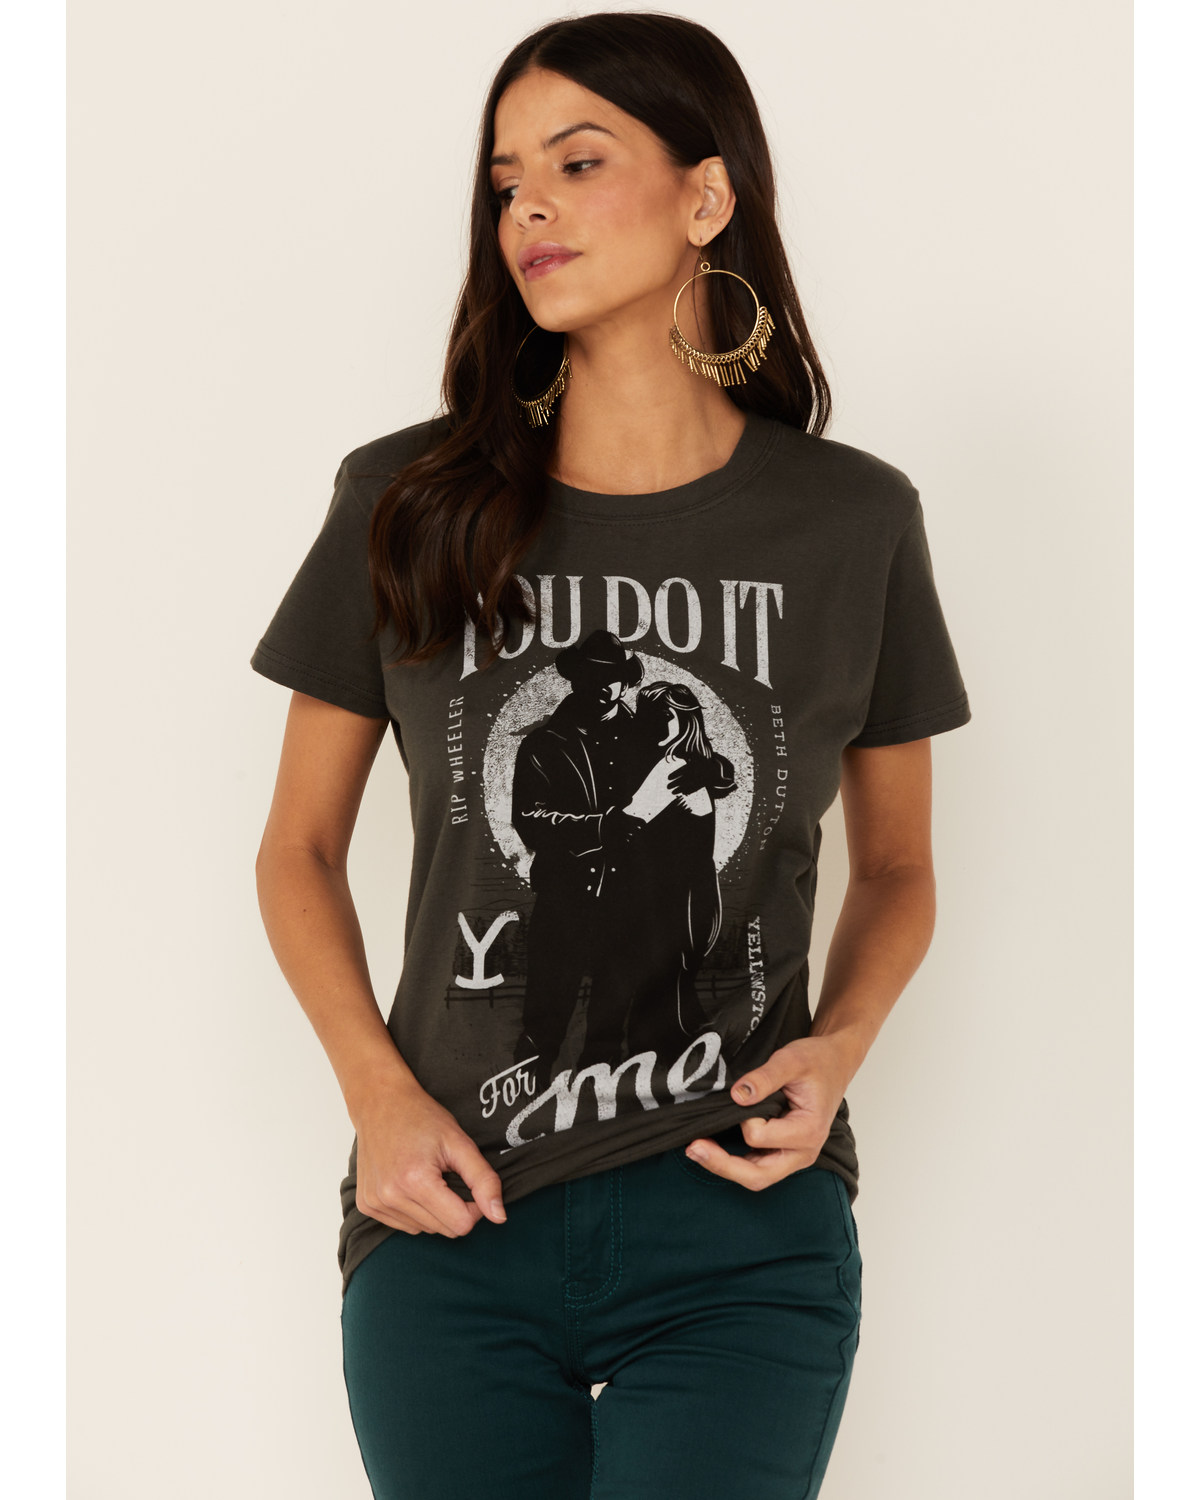 Paramount Network's Yellowstone Women's Charcoal You Do It For Me Graphic Tee